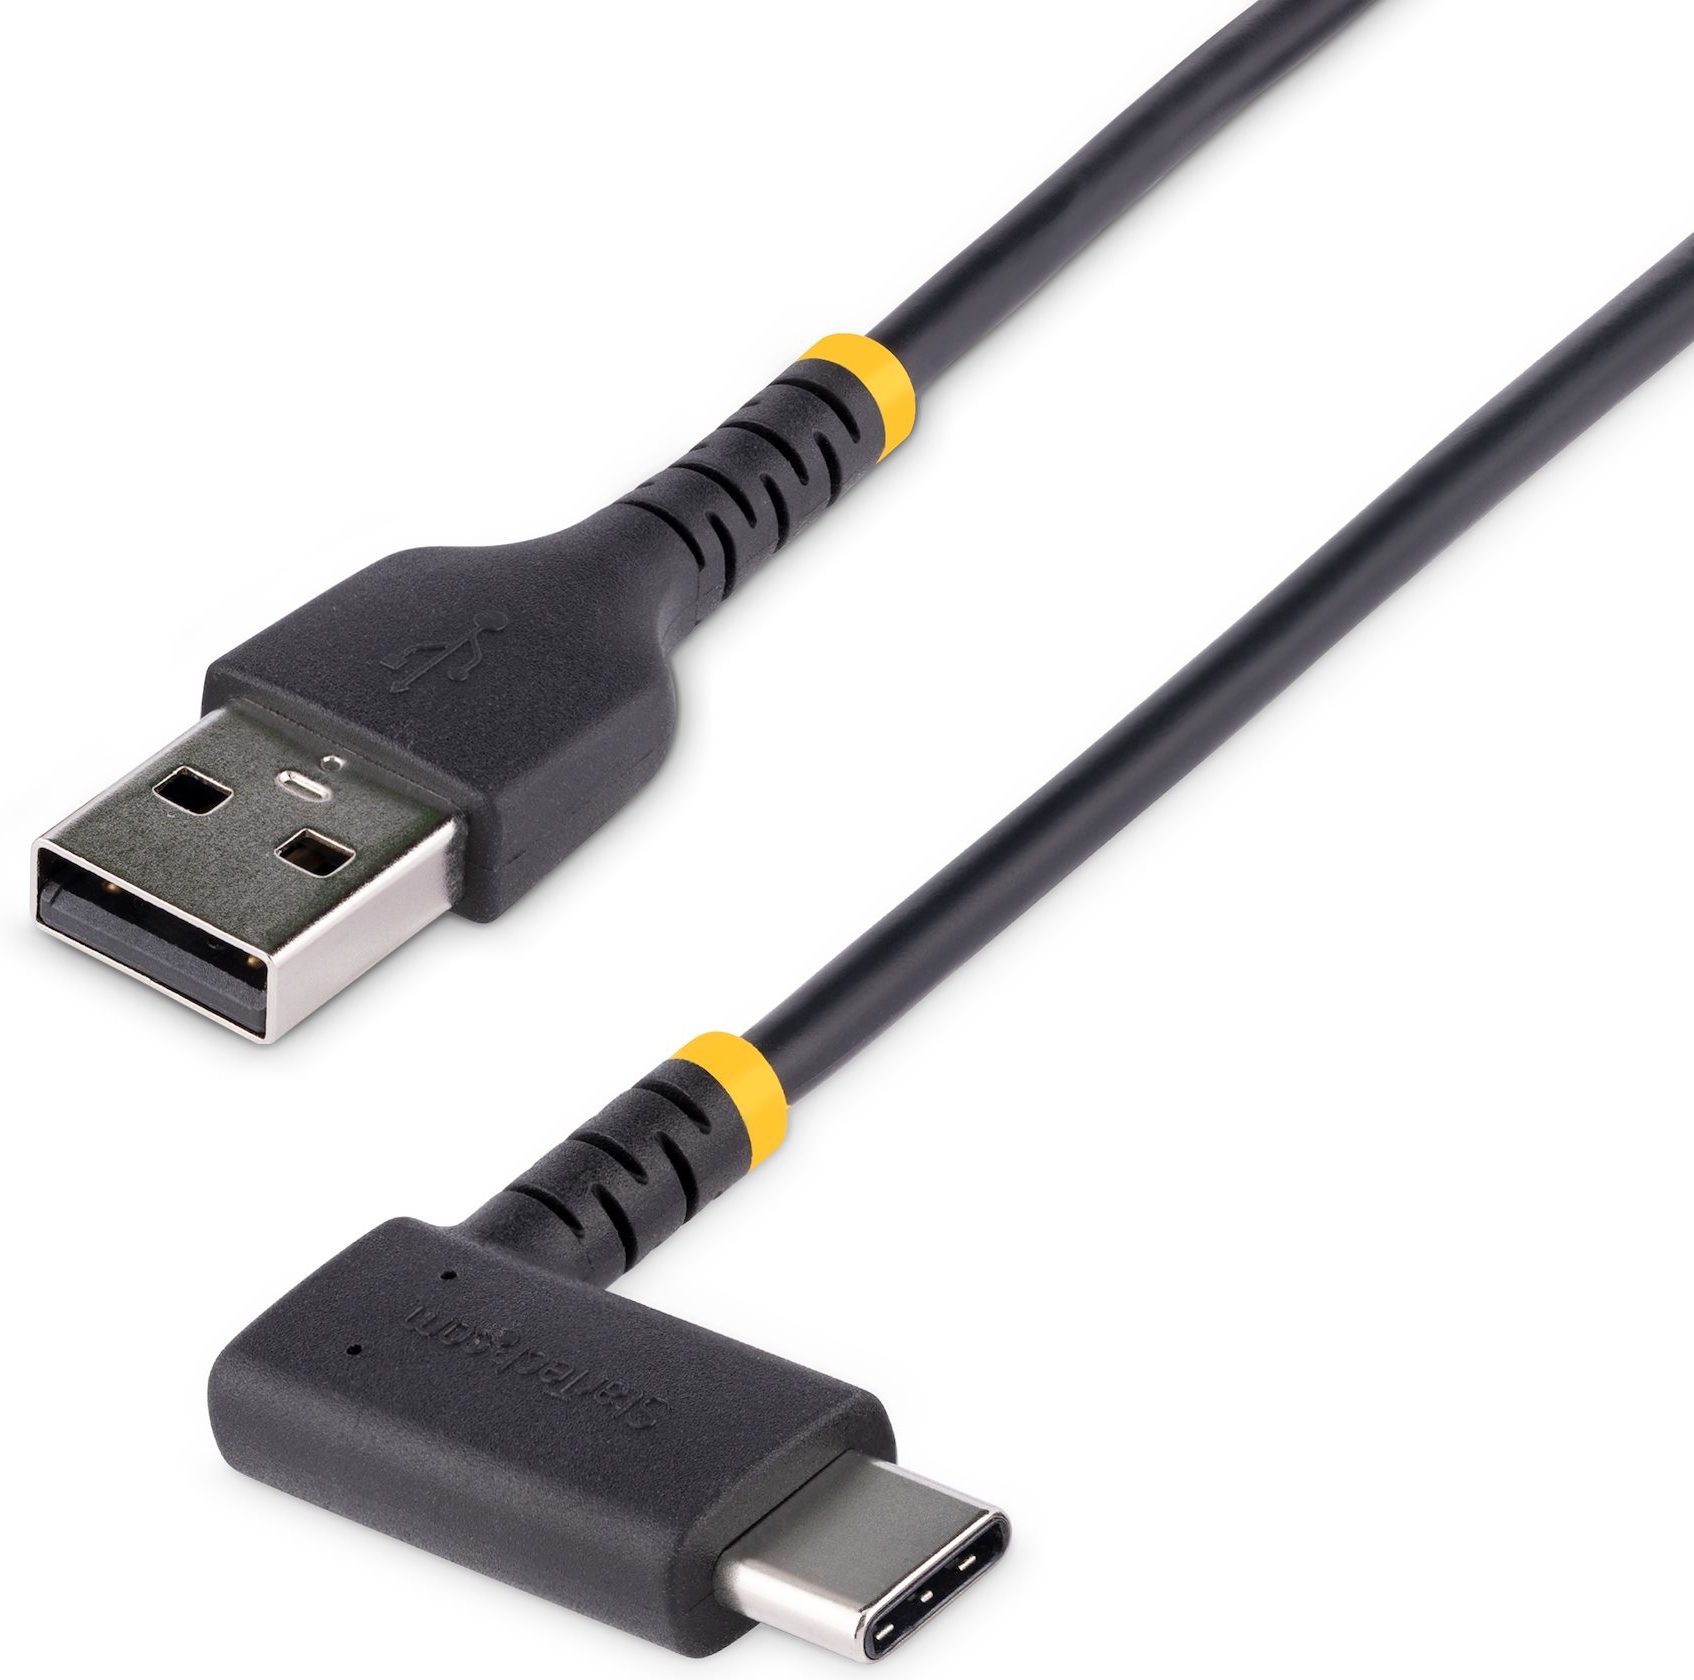 StarTech.com 6ft (2m) USB A to C Charging Cable Right Angle, Heavy